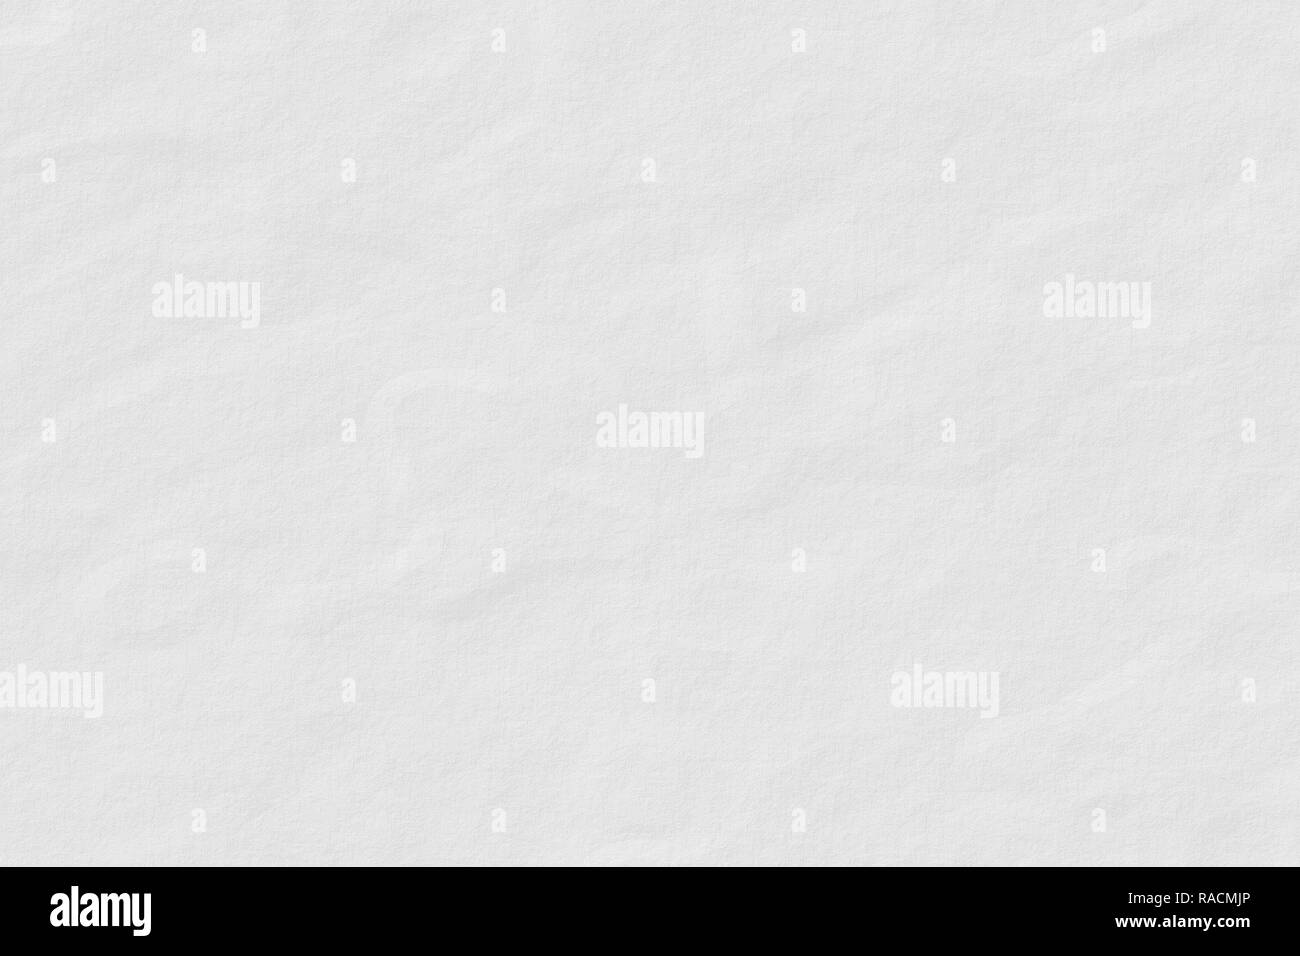 Background of white cardboard texture Stock Photo - Alamy